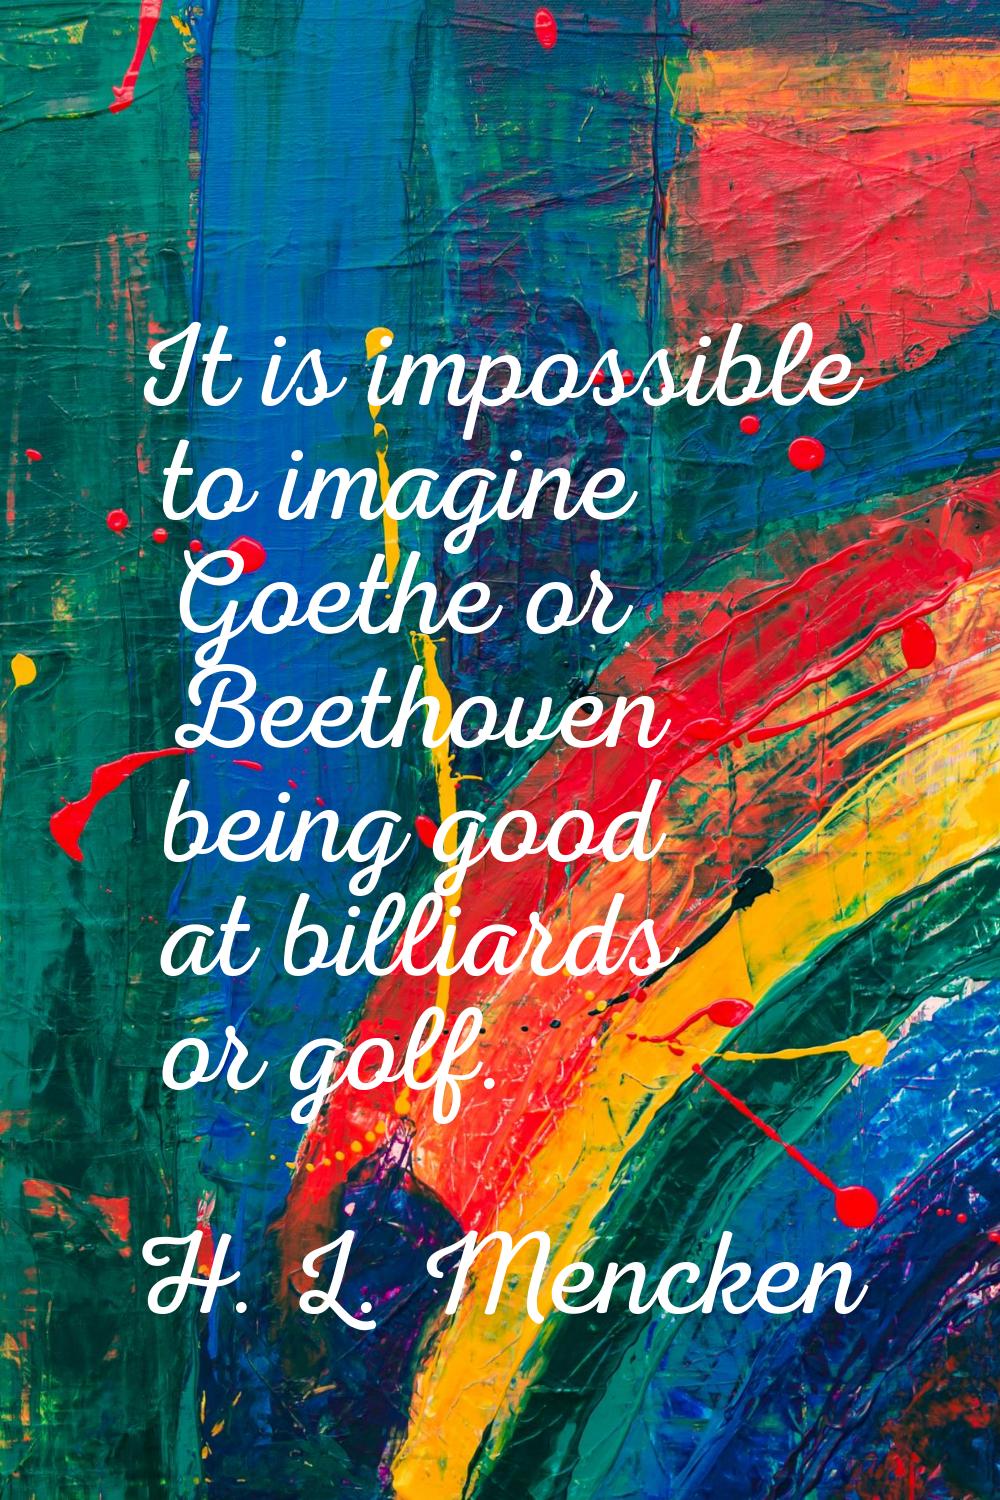 It is impossible to imagine Goethe or Beethoven being good at billiards or golf.